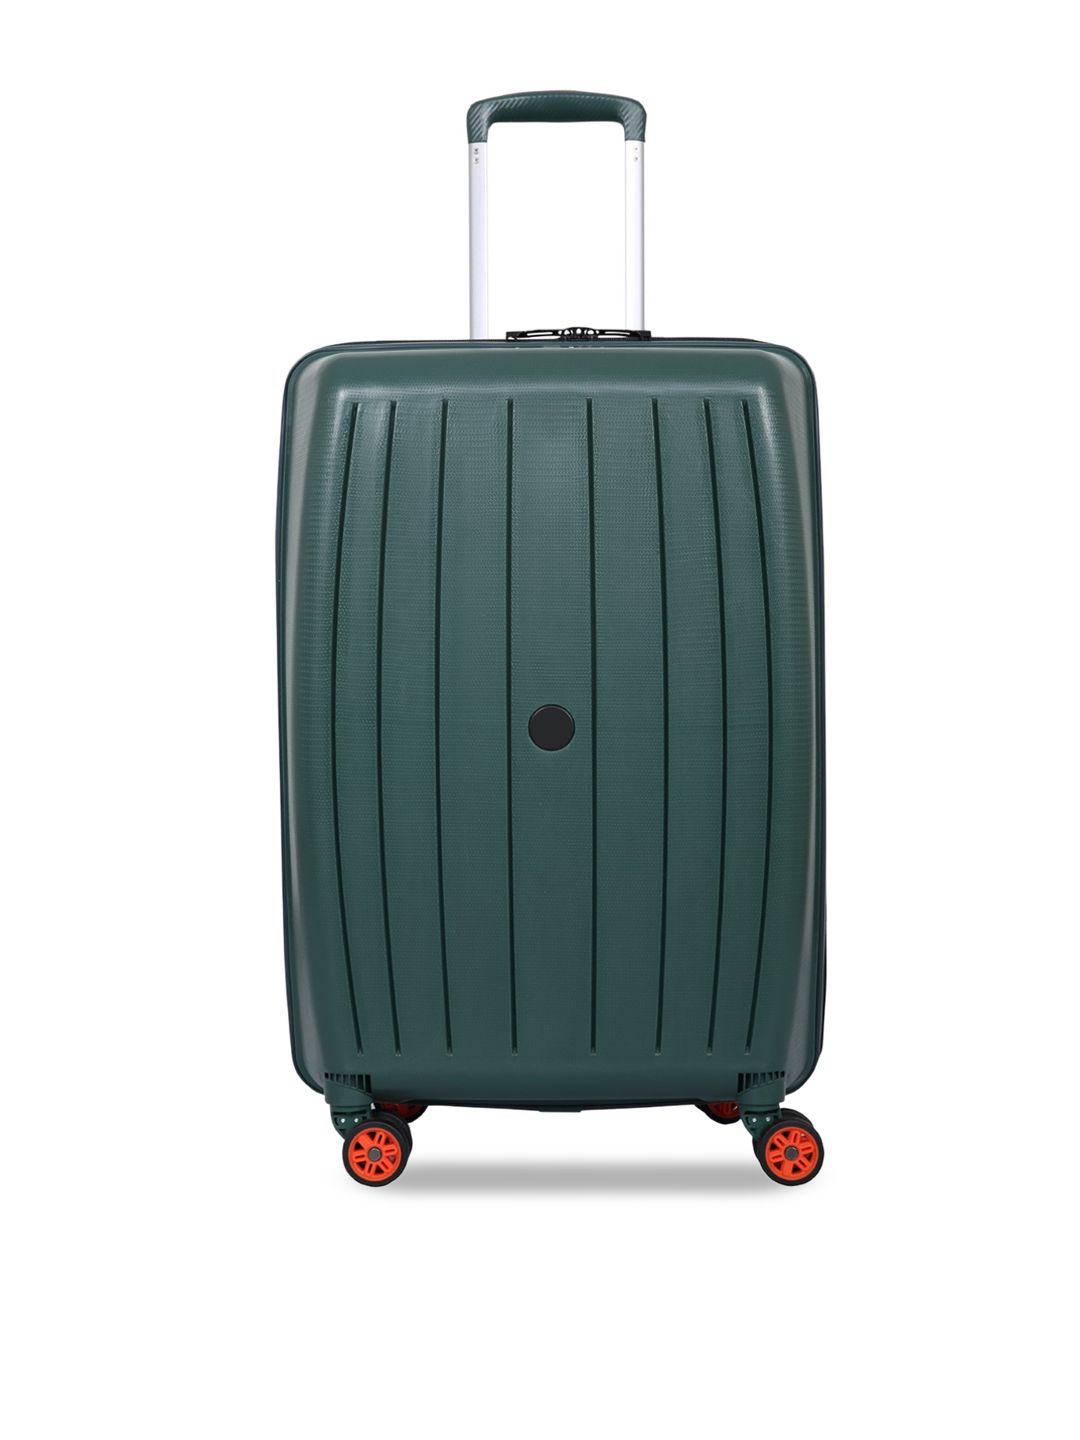 Polo Class Green Hard Side Scan Trolley Bag - Medium Price in India